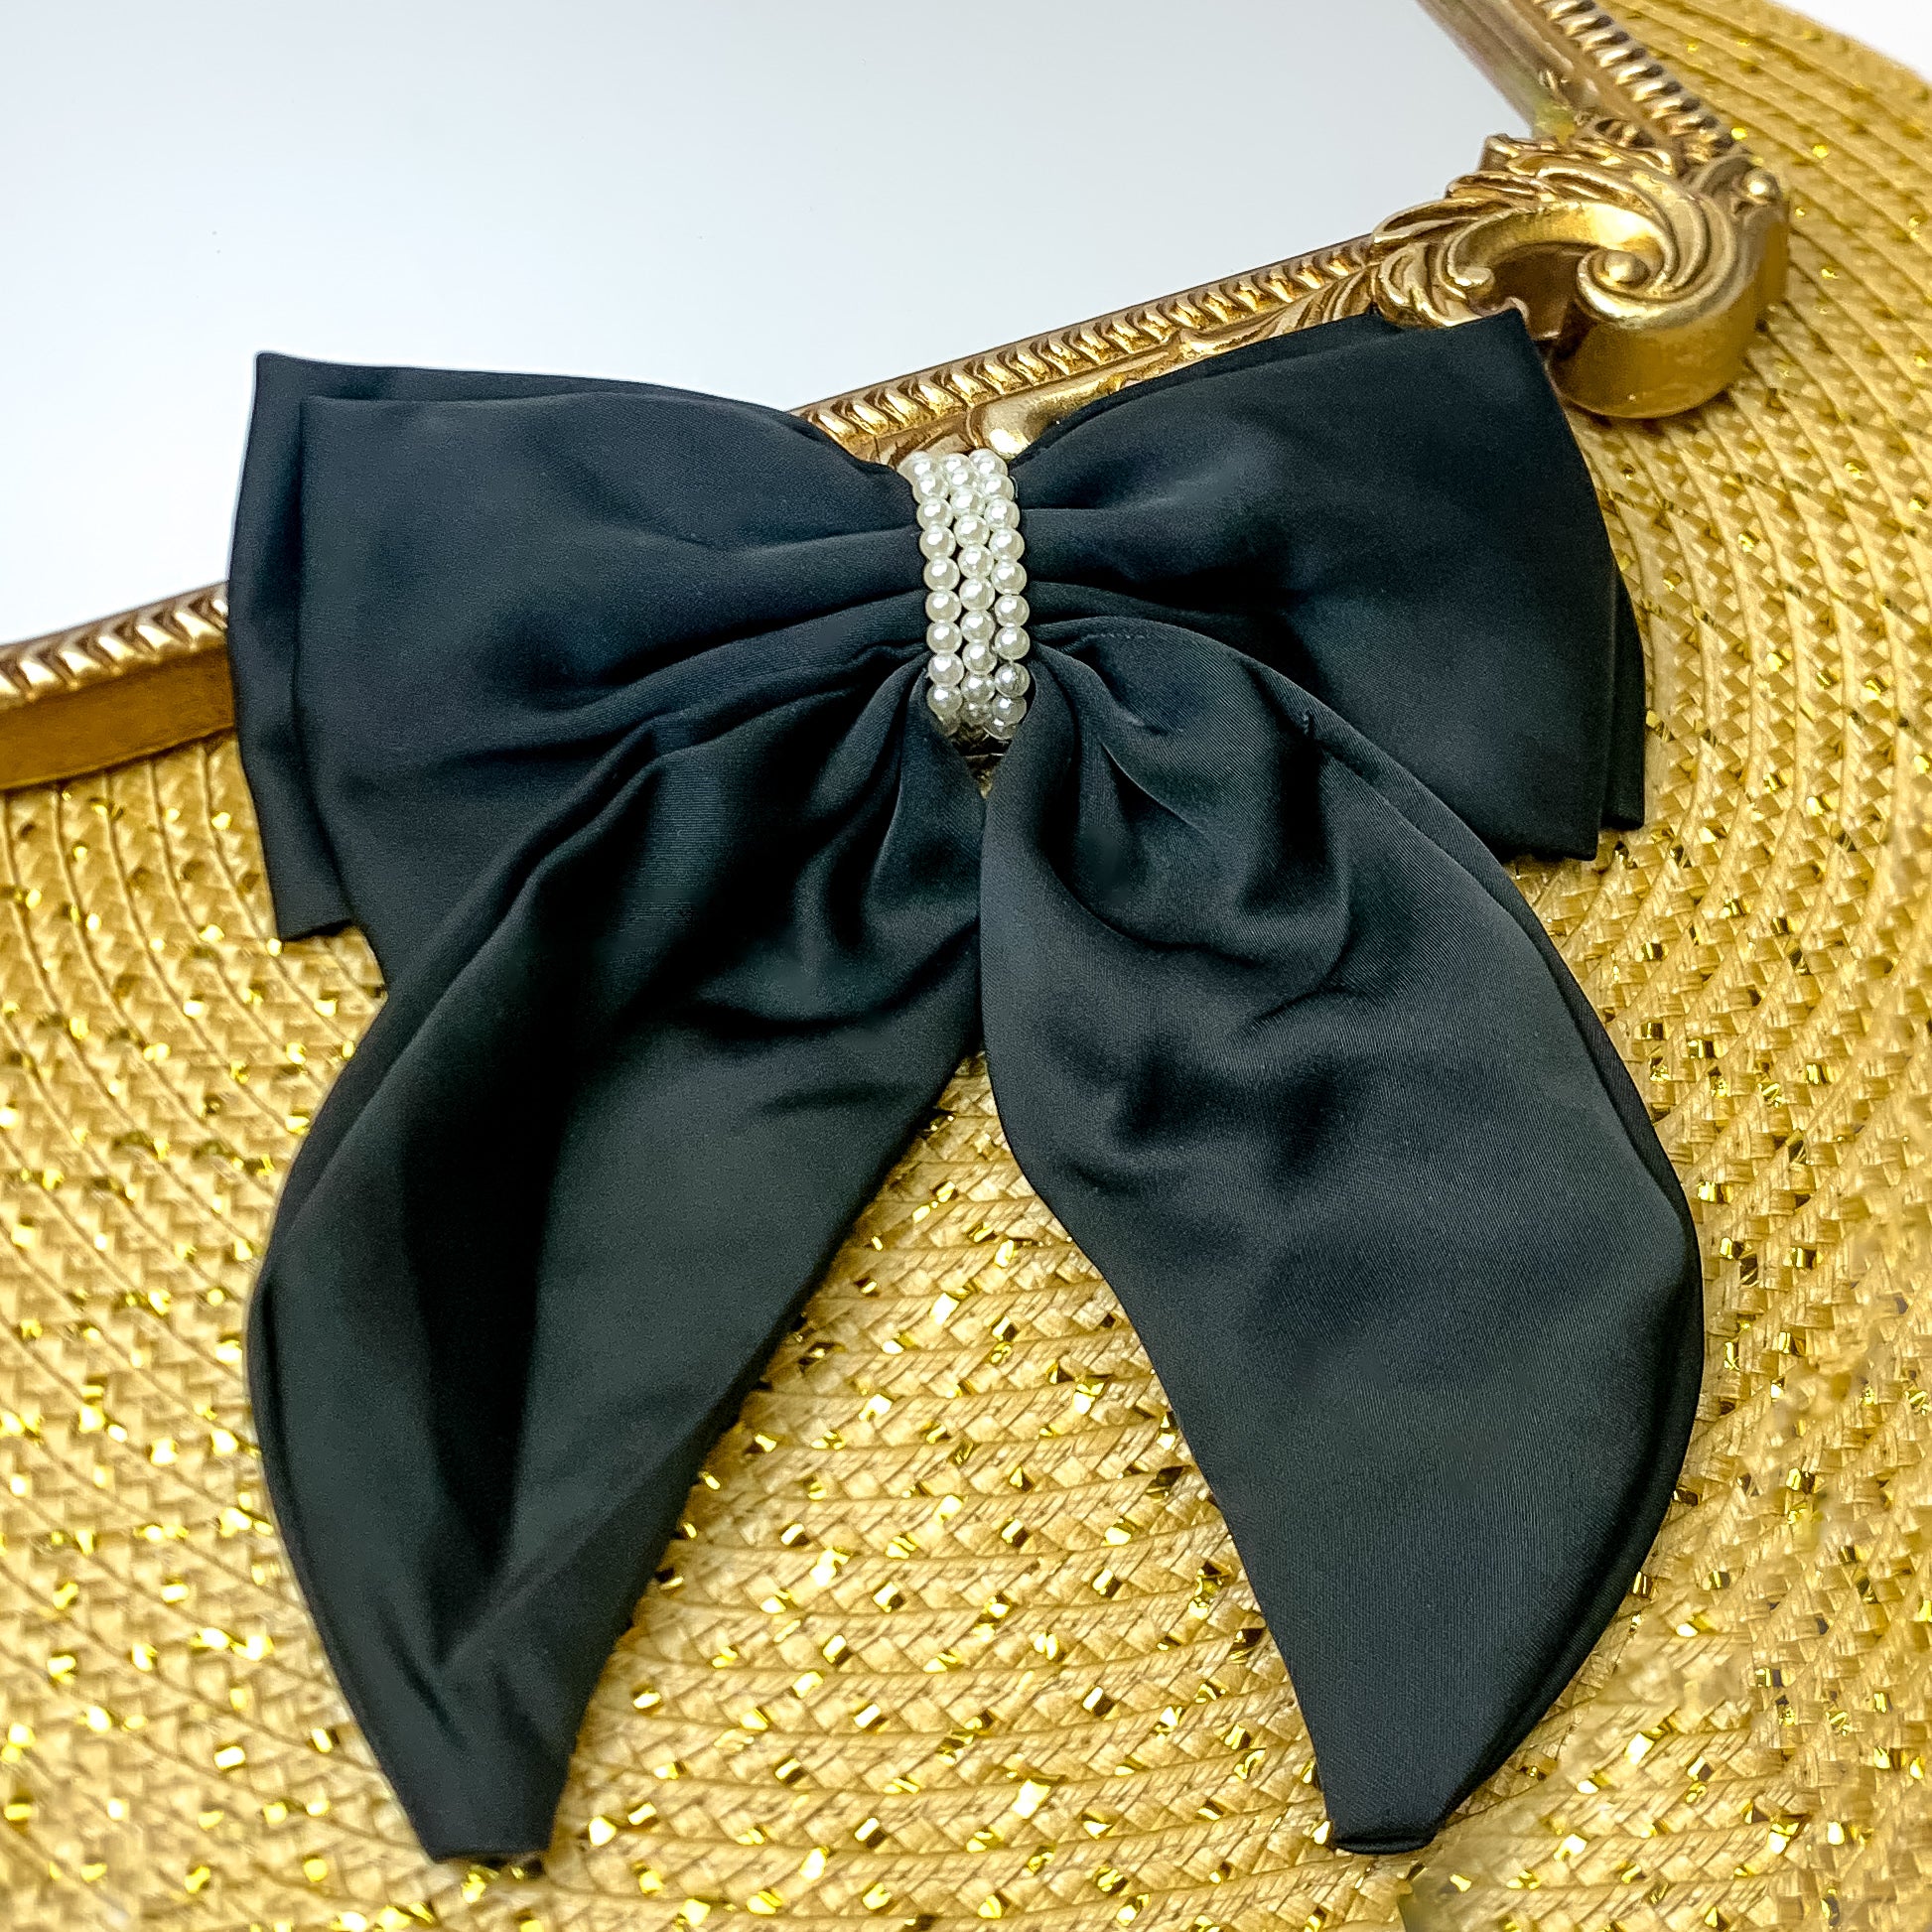 This layered black bow with a pearl canter is laid against a gold mirror and has a gold background.